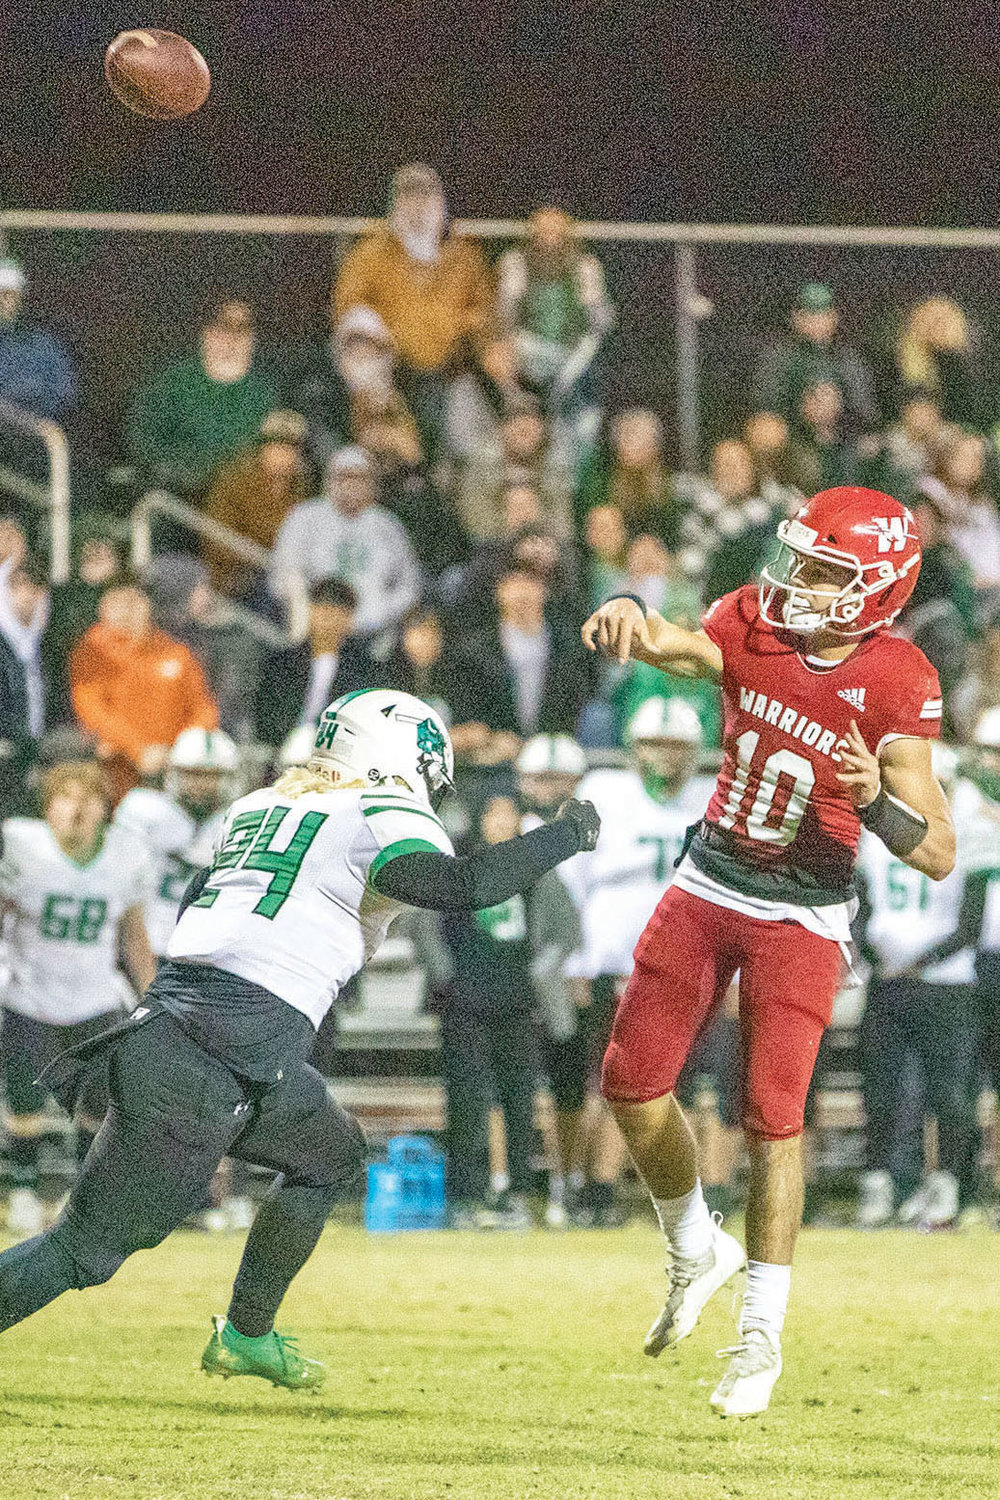 Washington sophomore Major Cantrell throws a ball over the middle during the Warriors’ 52-21 win over Jones Friday night. Washington travels to Owasso to face Rejoice Christian in the quarterfinals of the State playoffs this Friday.